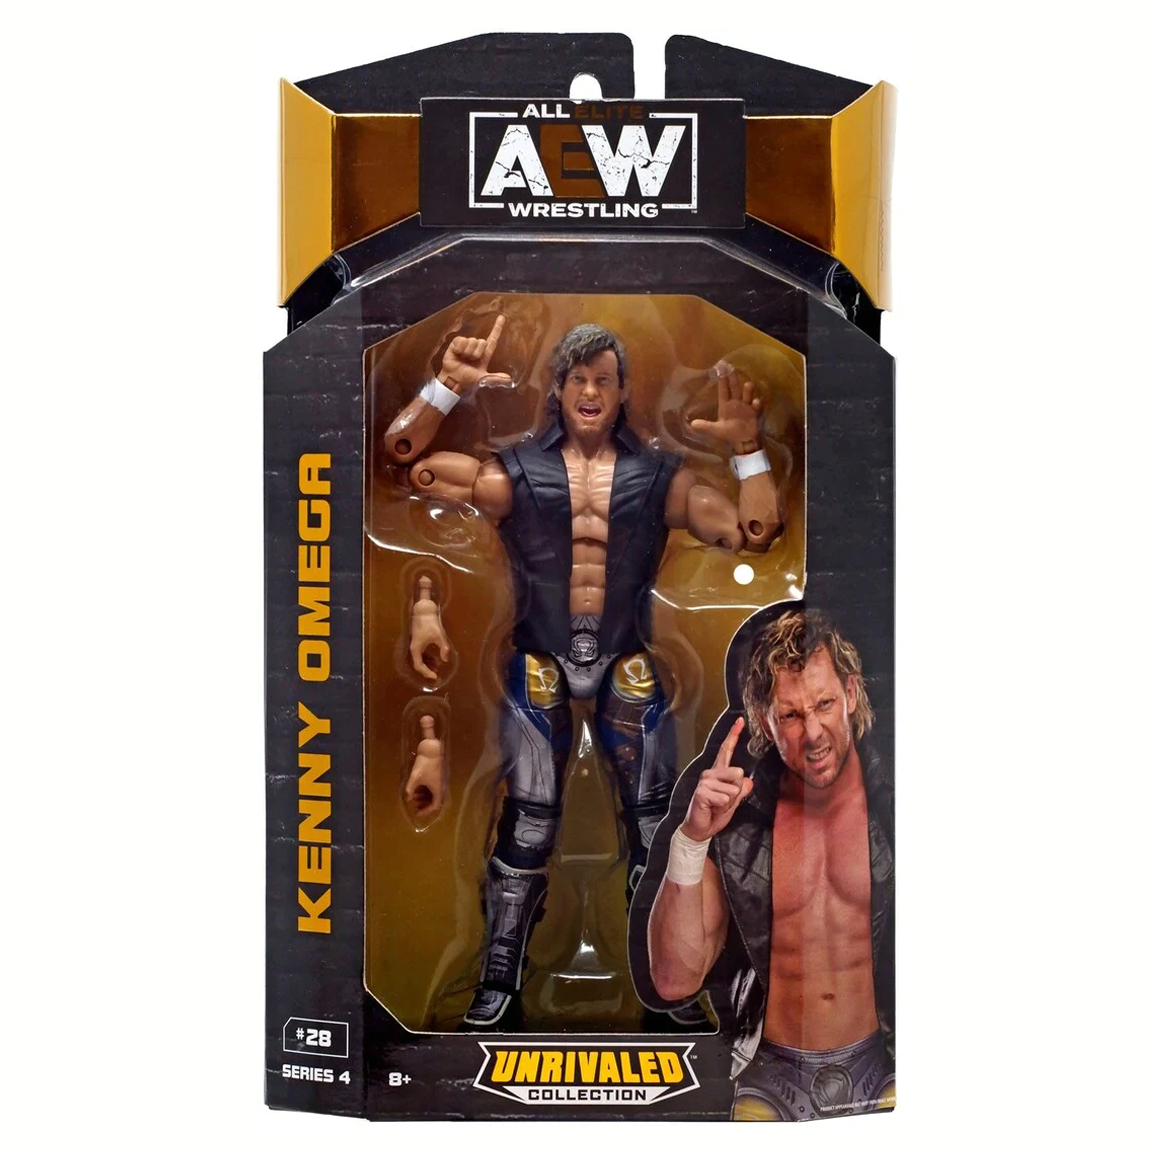 Collectible Jazwares AEW Unrivaled Collection Series 4 Kenny Omega Action Figure with interchangeable parts